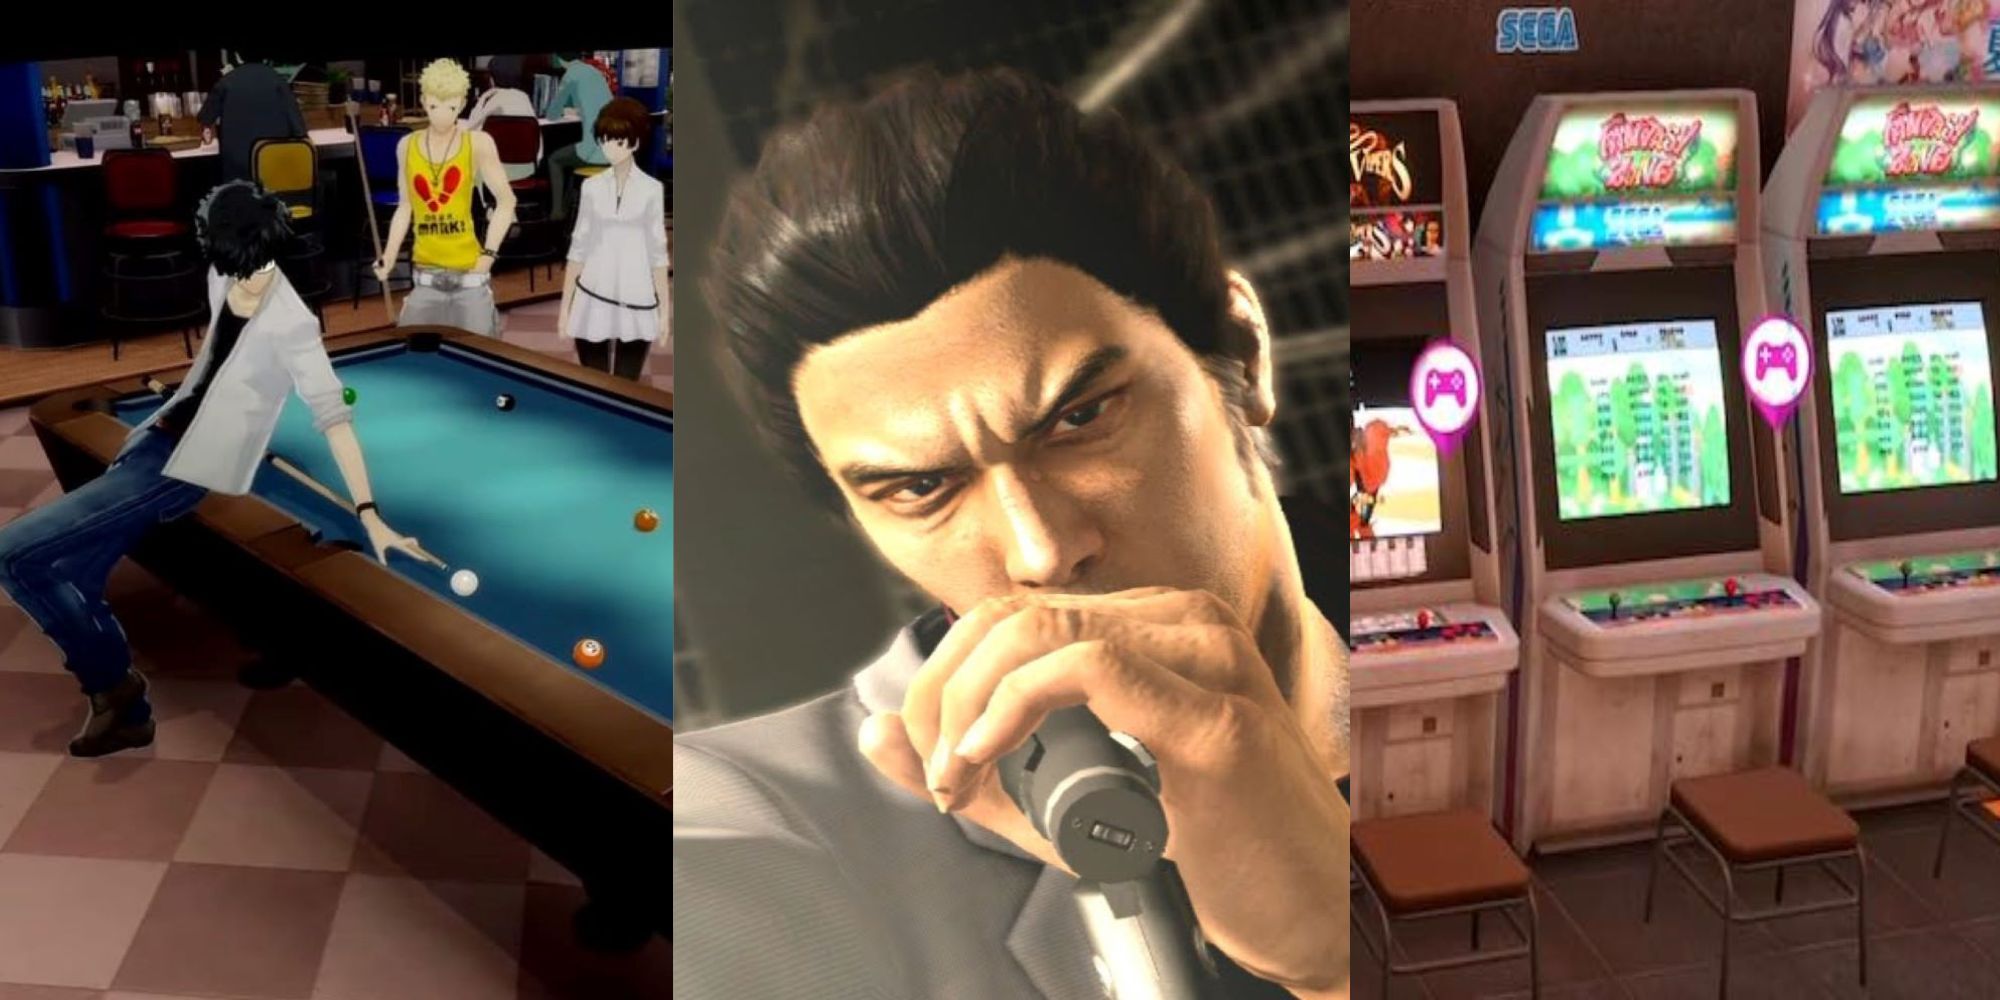 Games With The Most Minigames Featuring Billiards from Persona 5 Royal, Karaoke from the Yakuza series, and Arcade from Lost Judgment